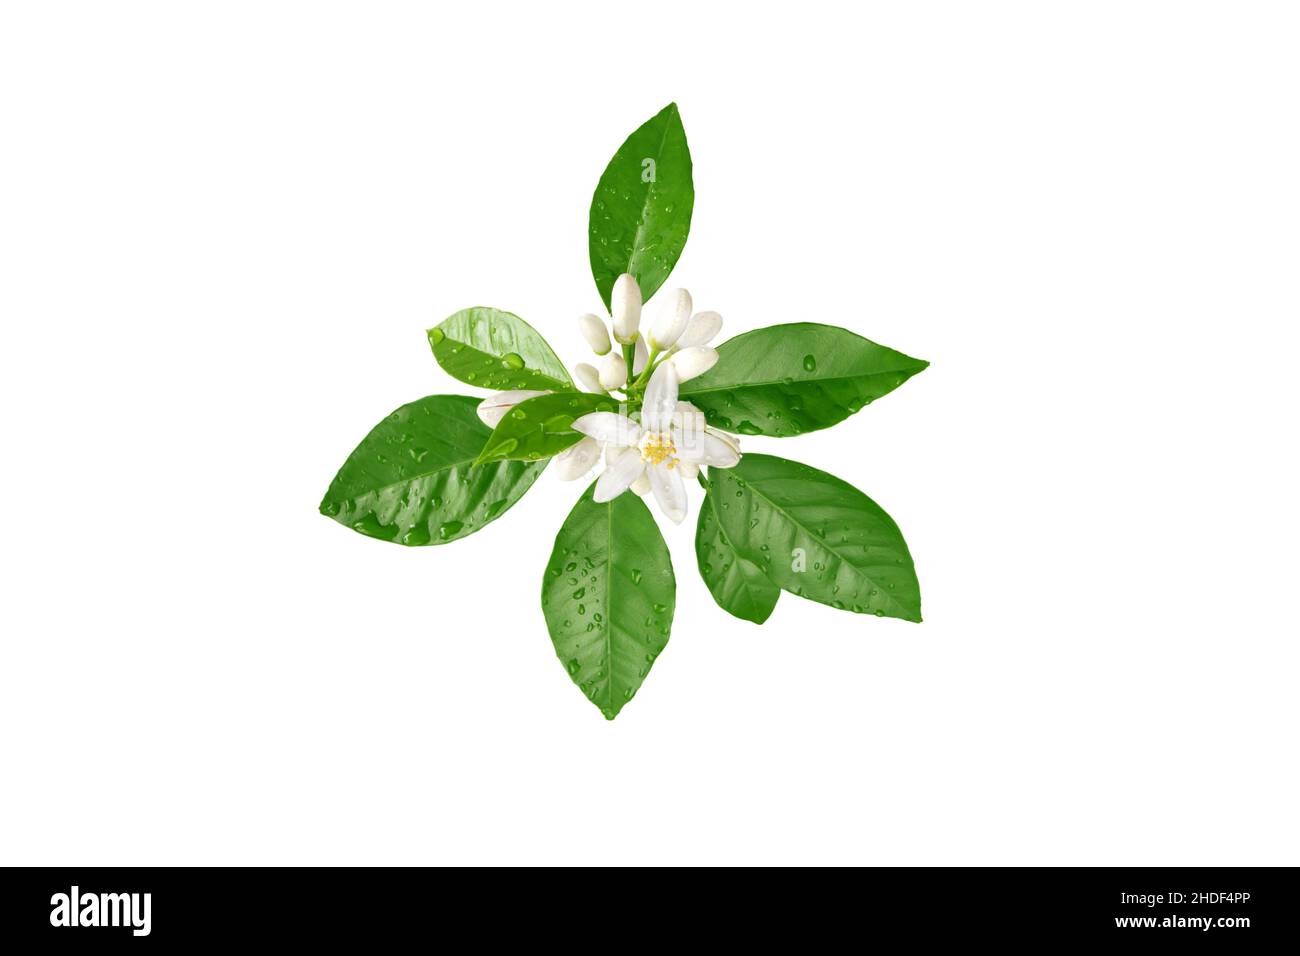 Orange tree branch with white flowers, buds and leaves and water drops isolated on white. Neroli blossom. Citrus bloom. Stock Photo